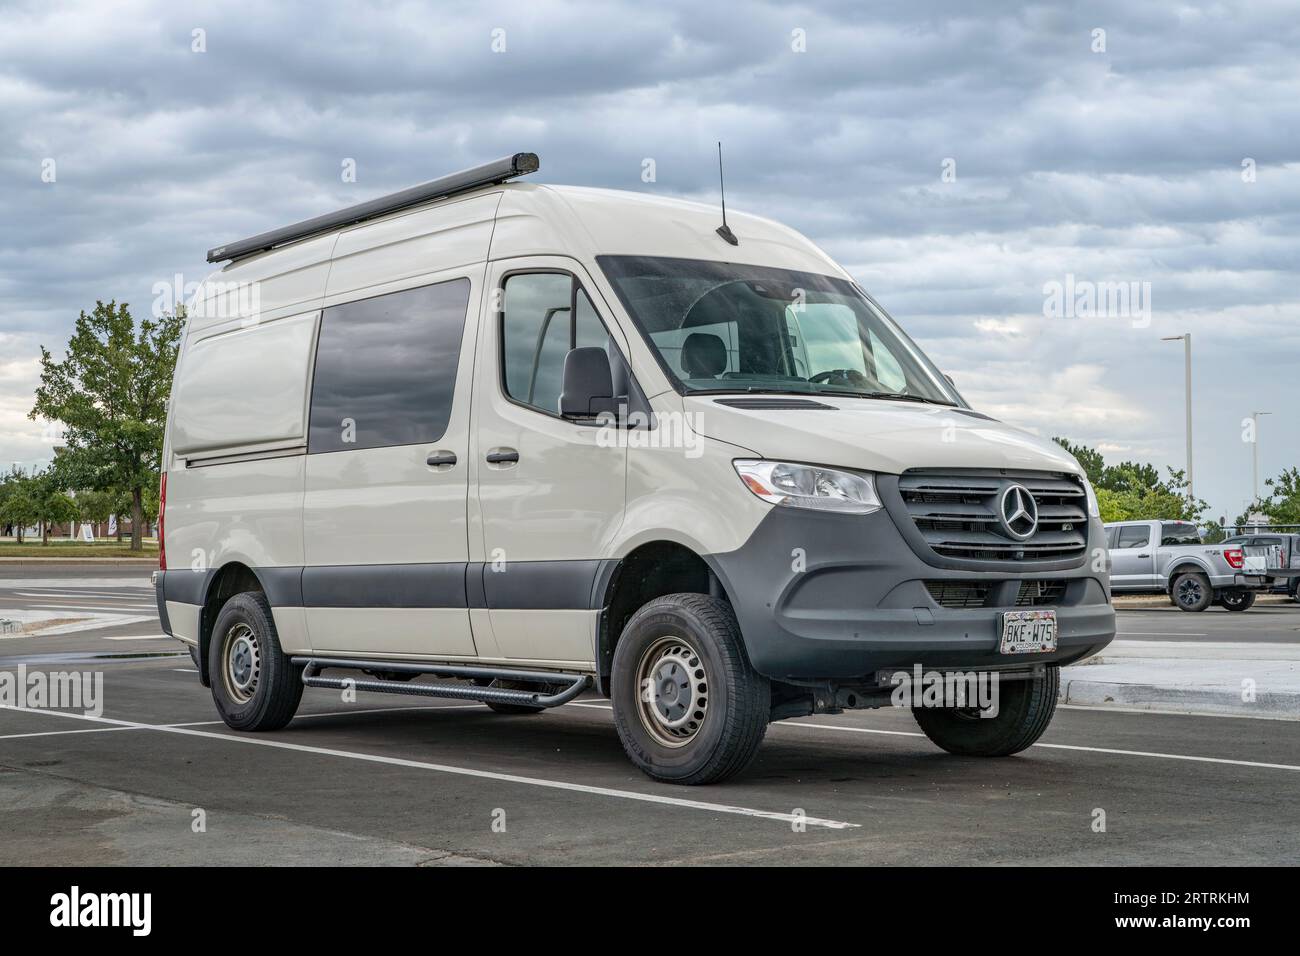 Loveland, CO, USA - August 25, 2023: 4x4 camper van on Mercedes Sprinter chassis at a parking lot. Stock Photo